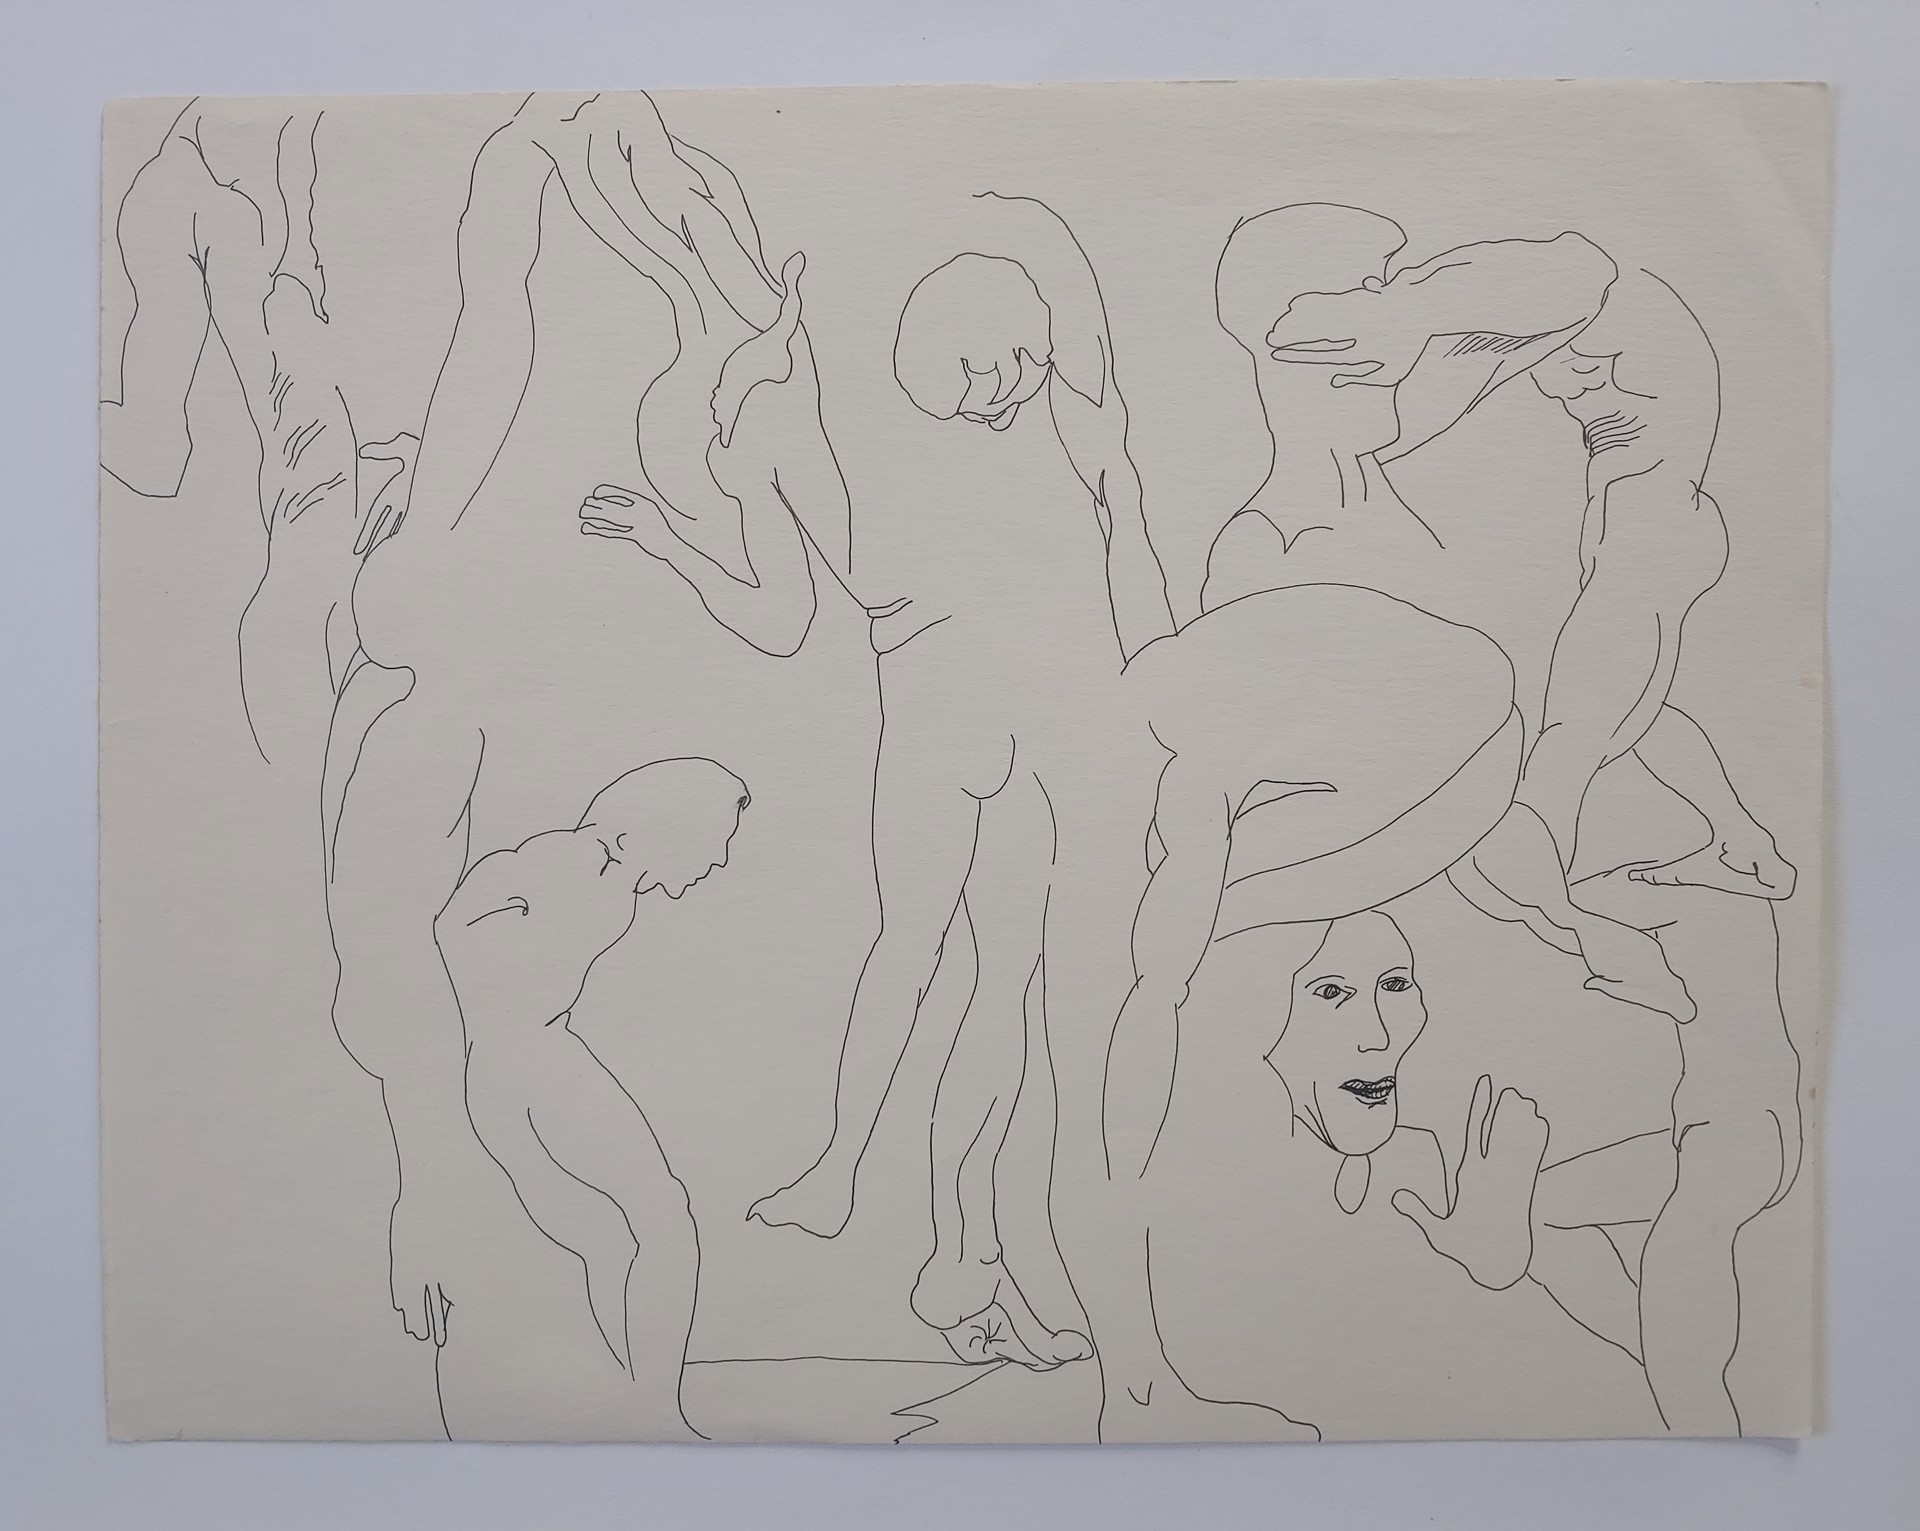 Abstract Figures Sketch - Drawing by David Amdur